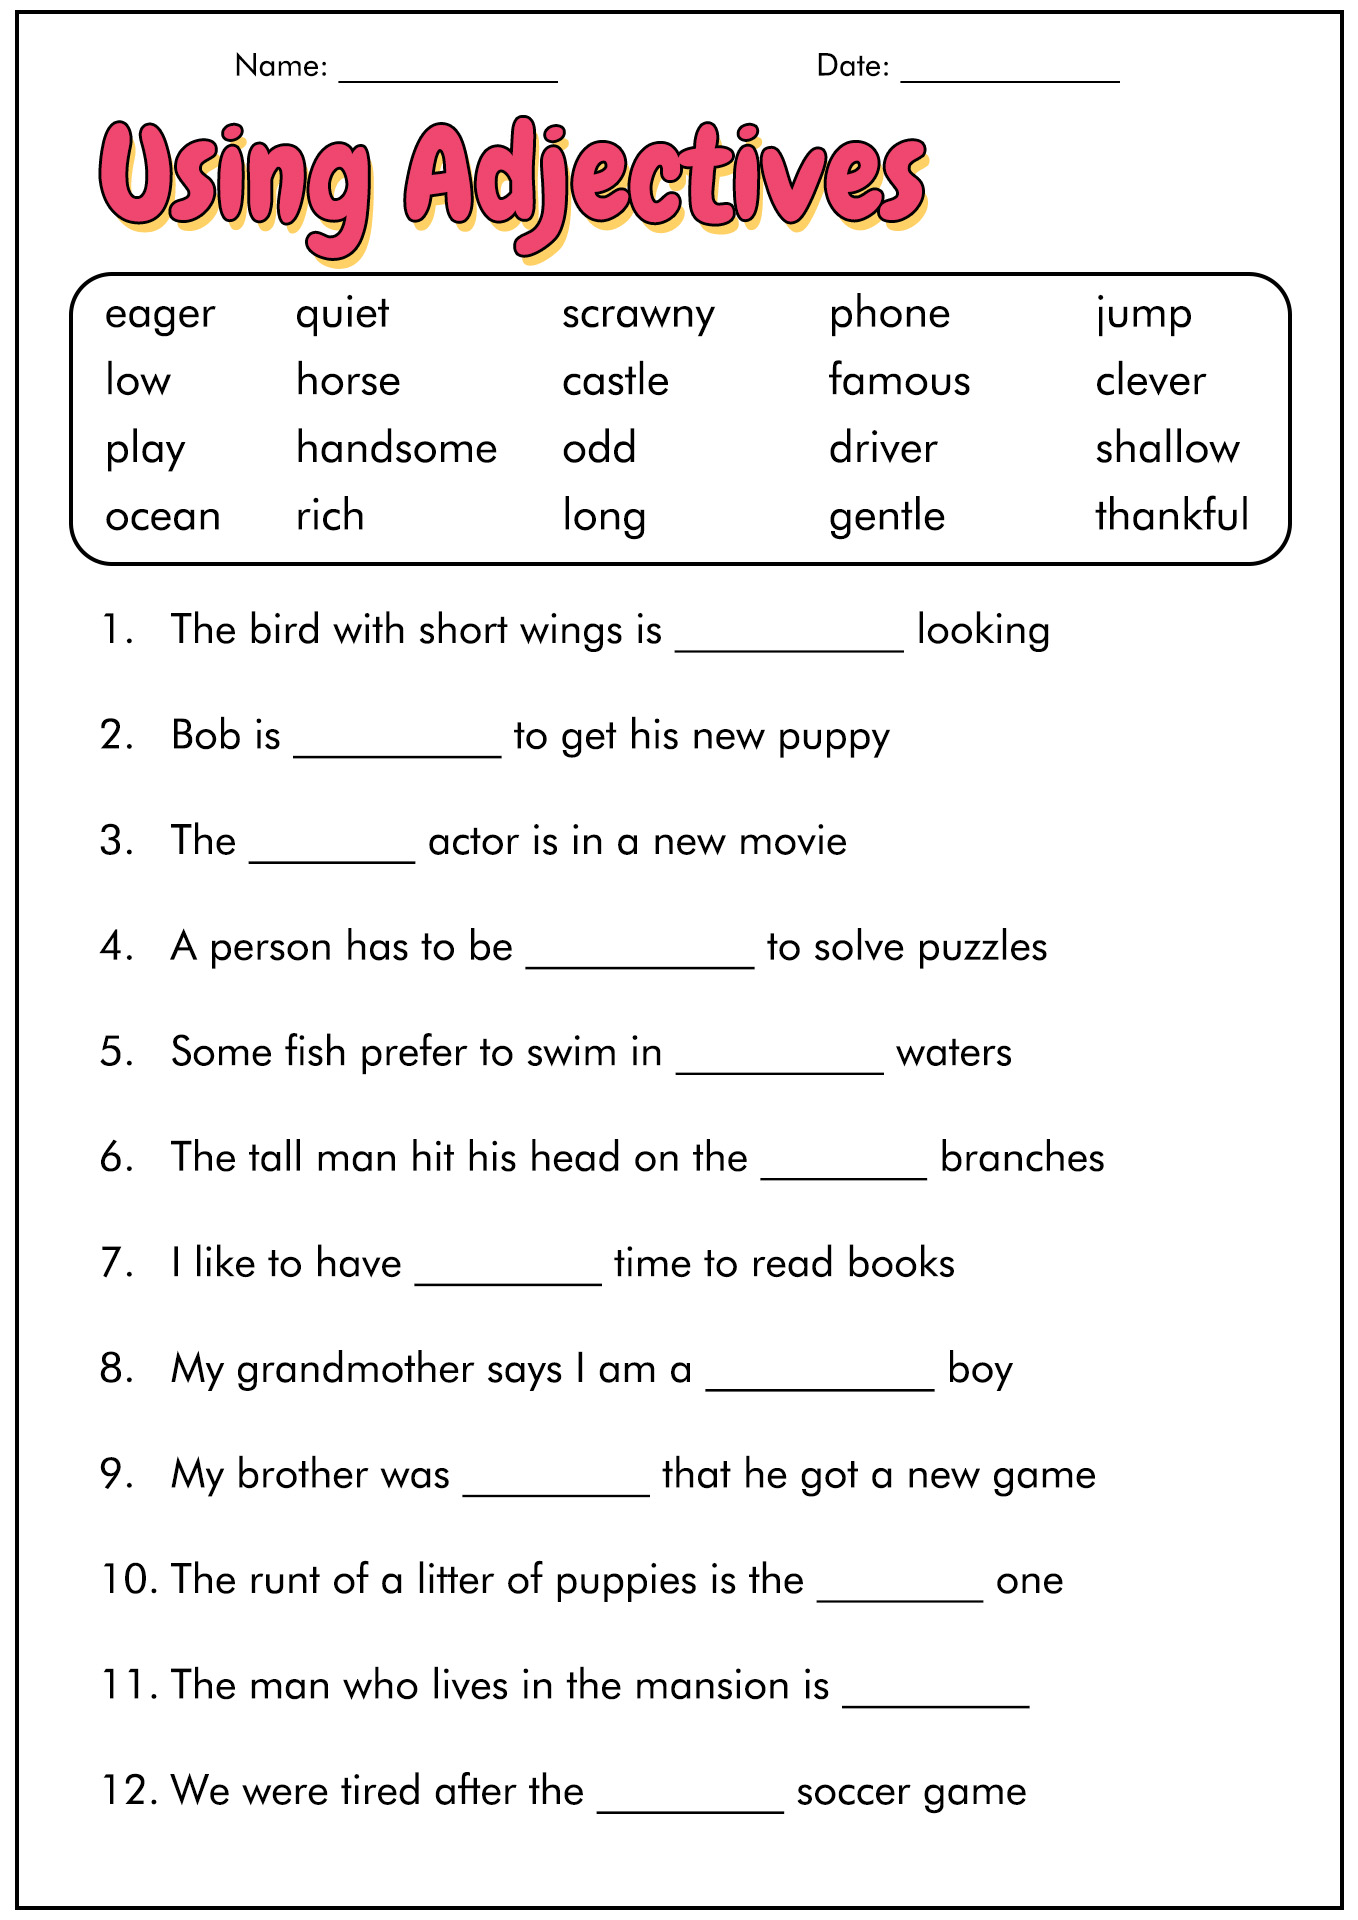 14-best-images-of-3rd-4th-grade-math-worksheets-4th-grade-math-worksheets-pdf-3rd-grade-math